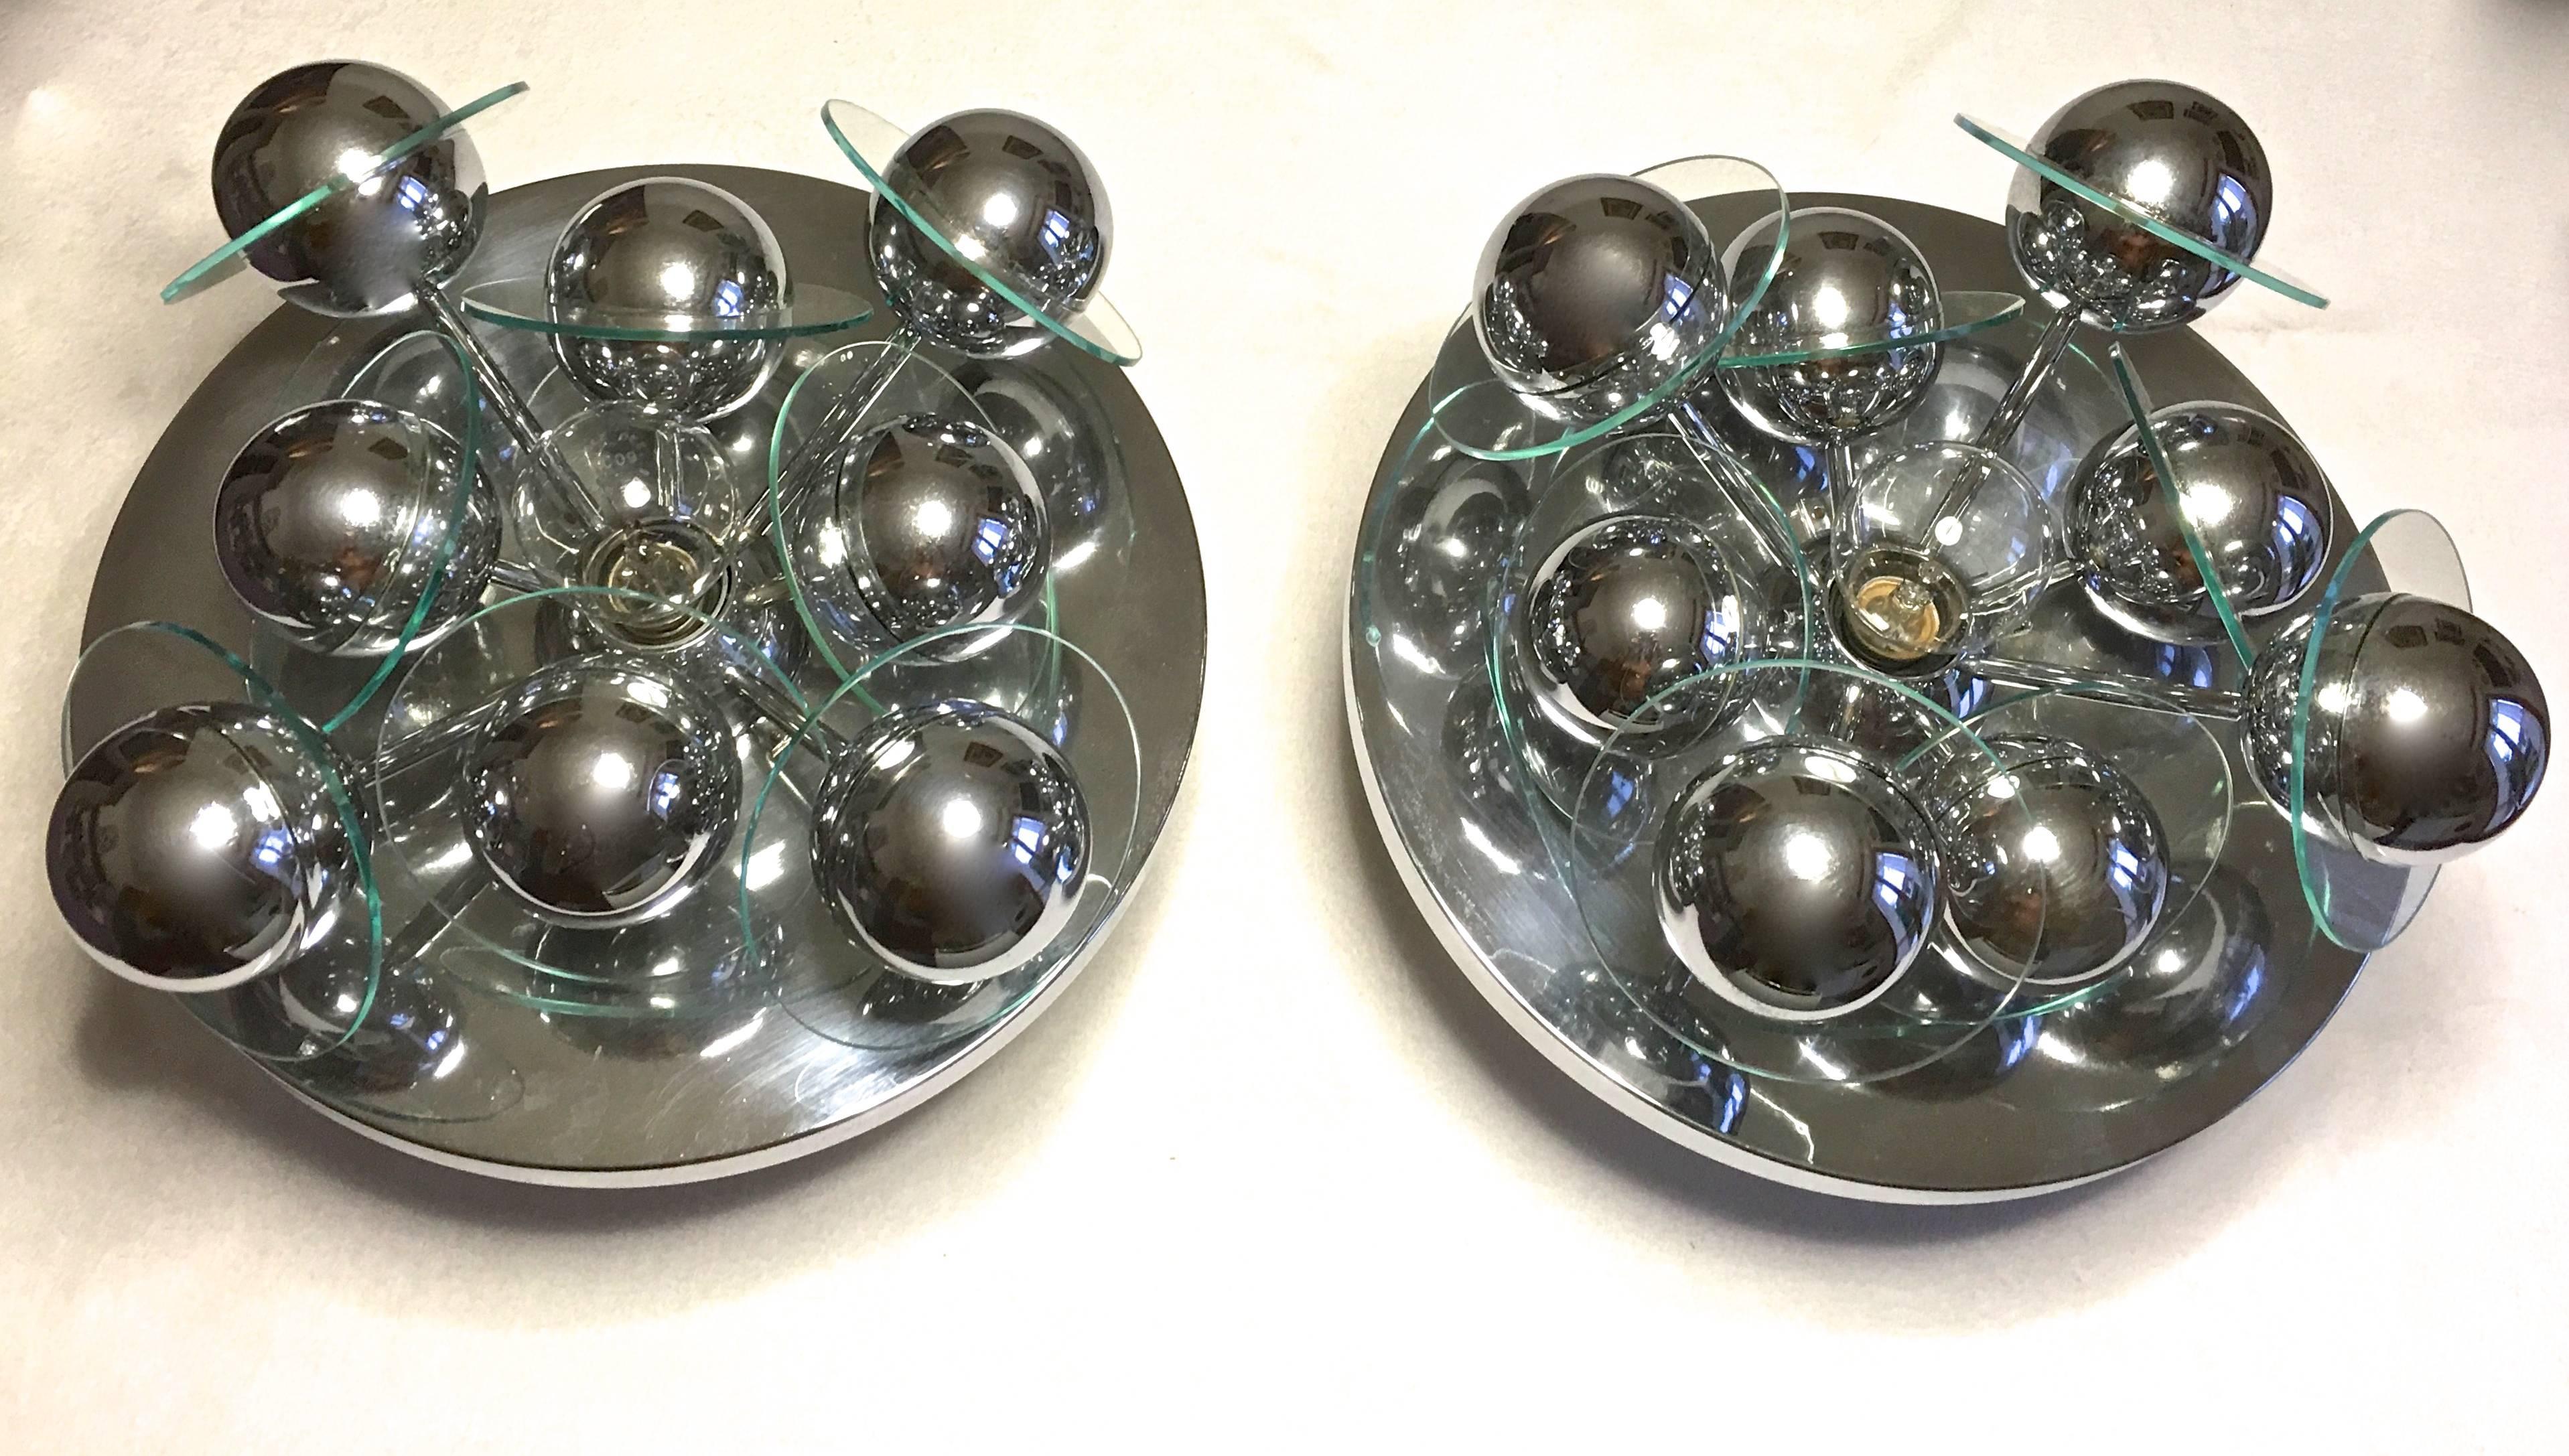 These two Mid-Century Sputnik lights mounted on a chrome base hold eight silver coloured spheres with glass discs. In the center a single big bulb spreads the light beautifully reflected by the spheres and the glass rings.